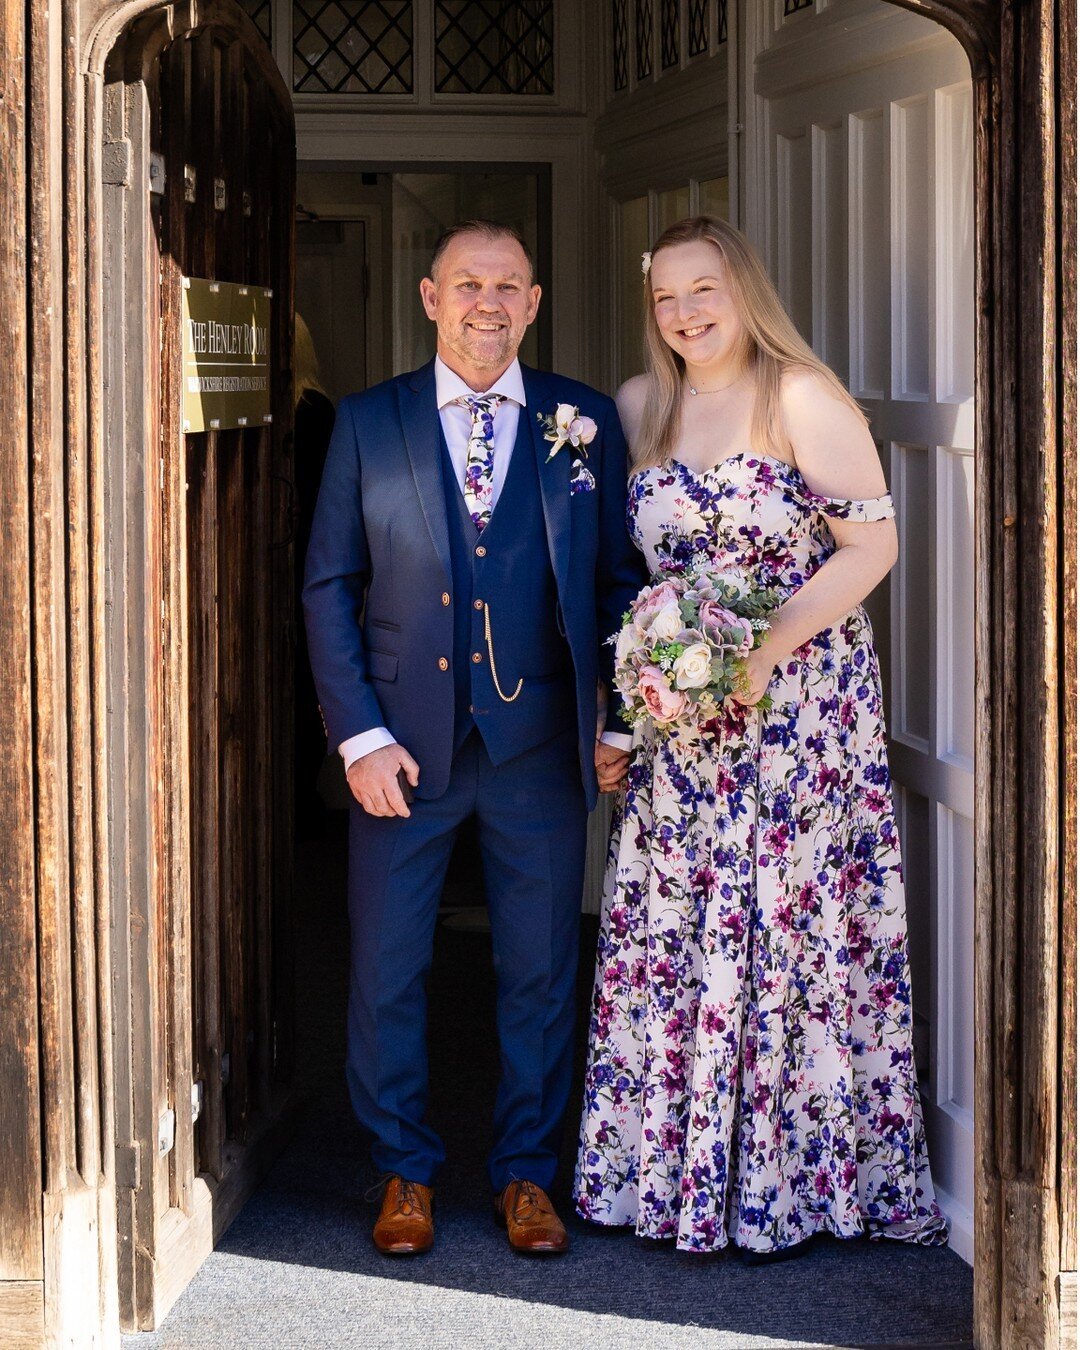 Congratulations to Sarah and Mark, who tied the knot in Stratford on the 24th of February. They had a fantastic action packed day spread over three locations in South Warwickshire. 

#weddingphotographerwarwickshire #henleyroomsstratford #stratfordwe